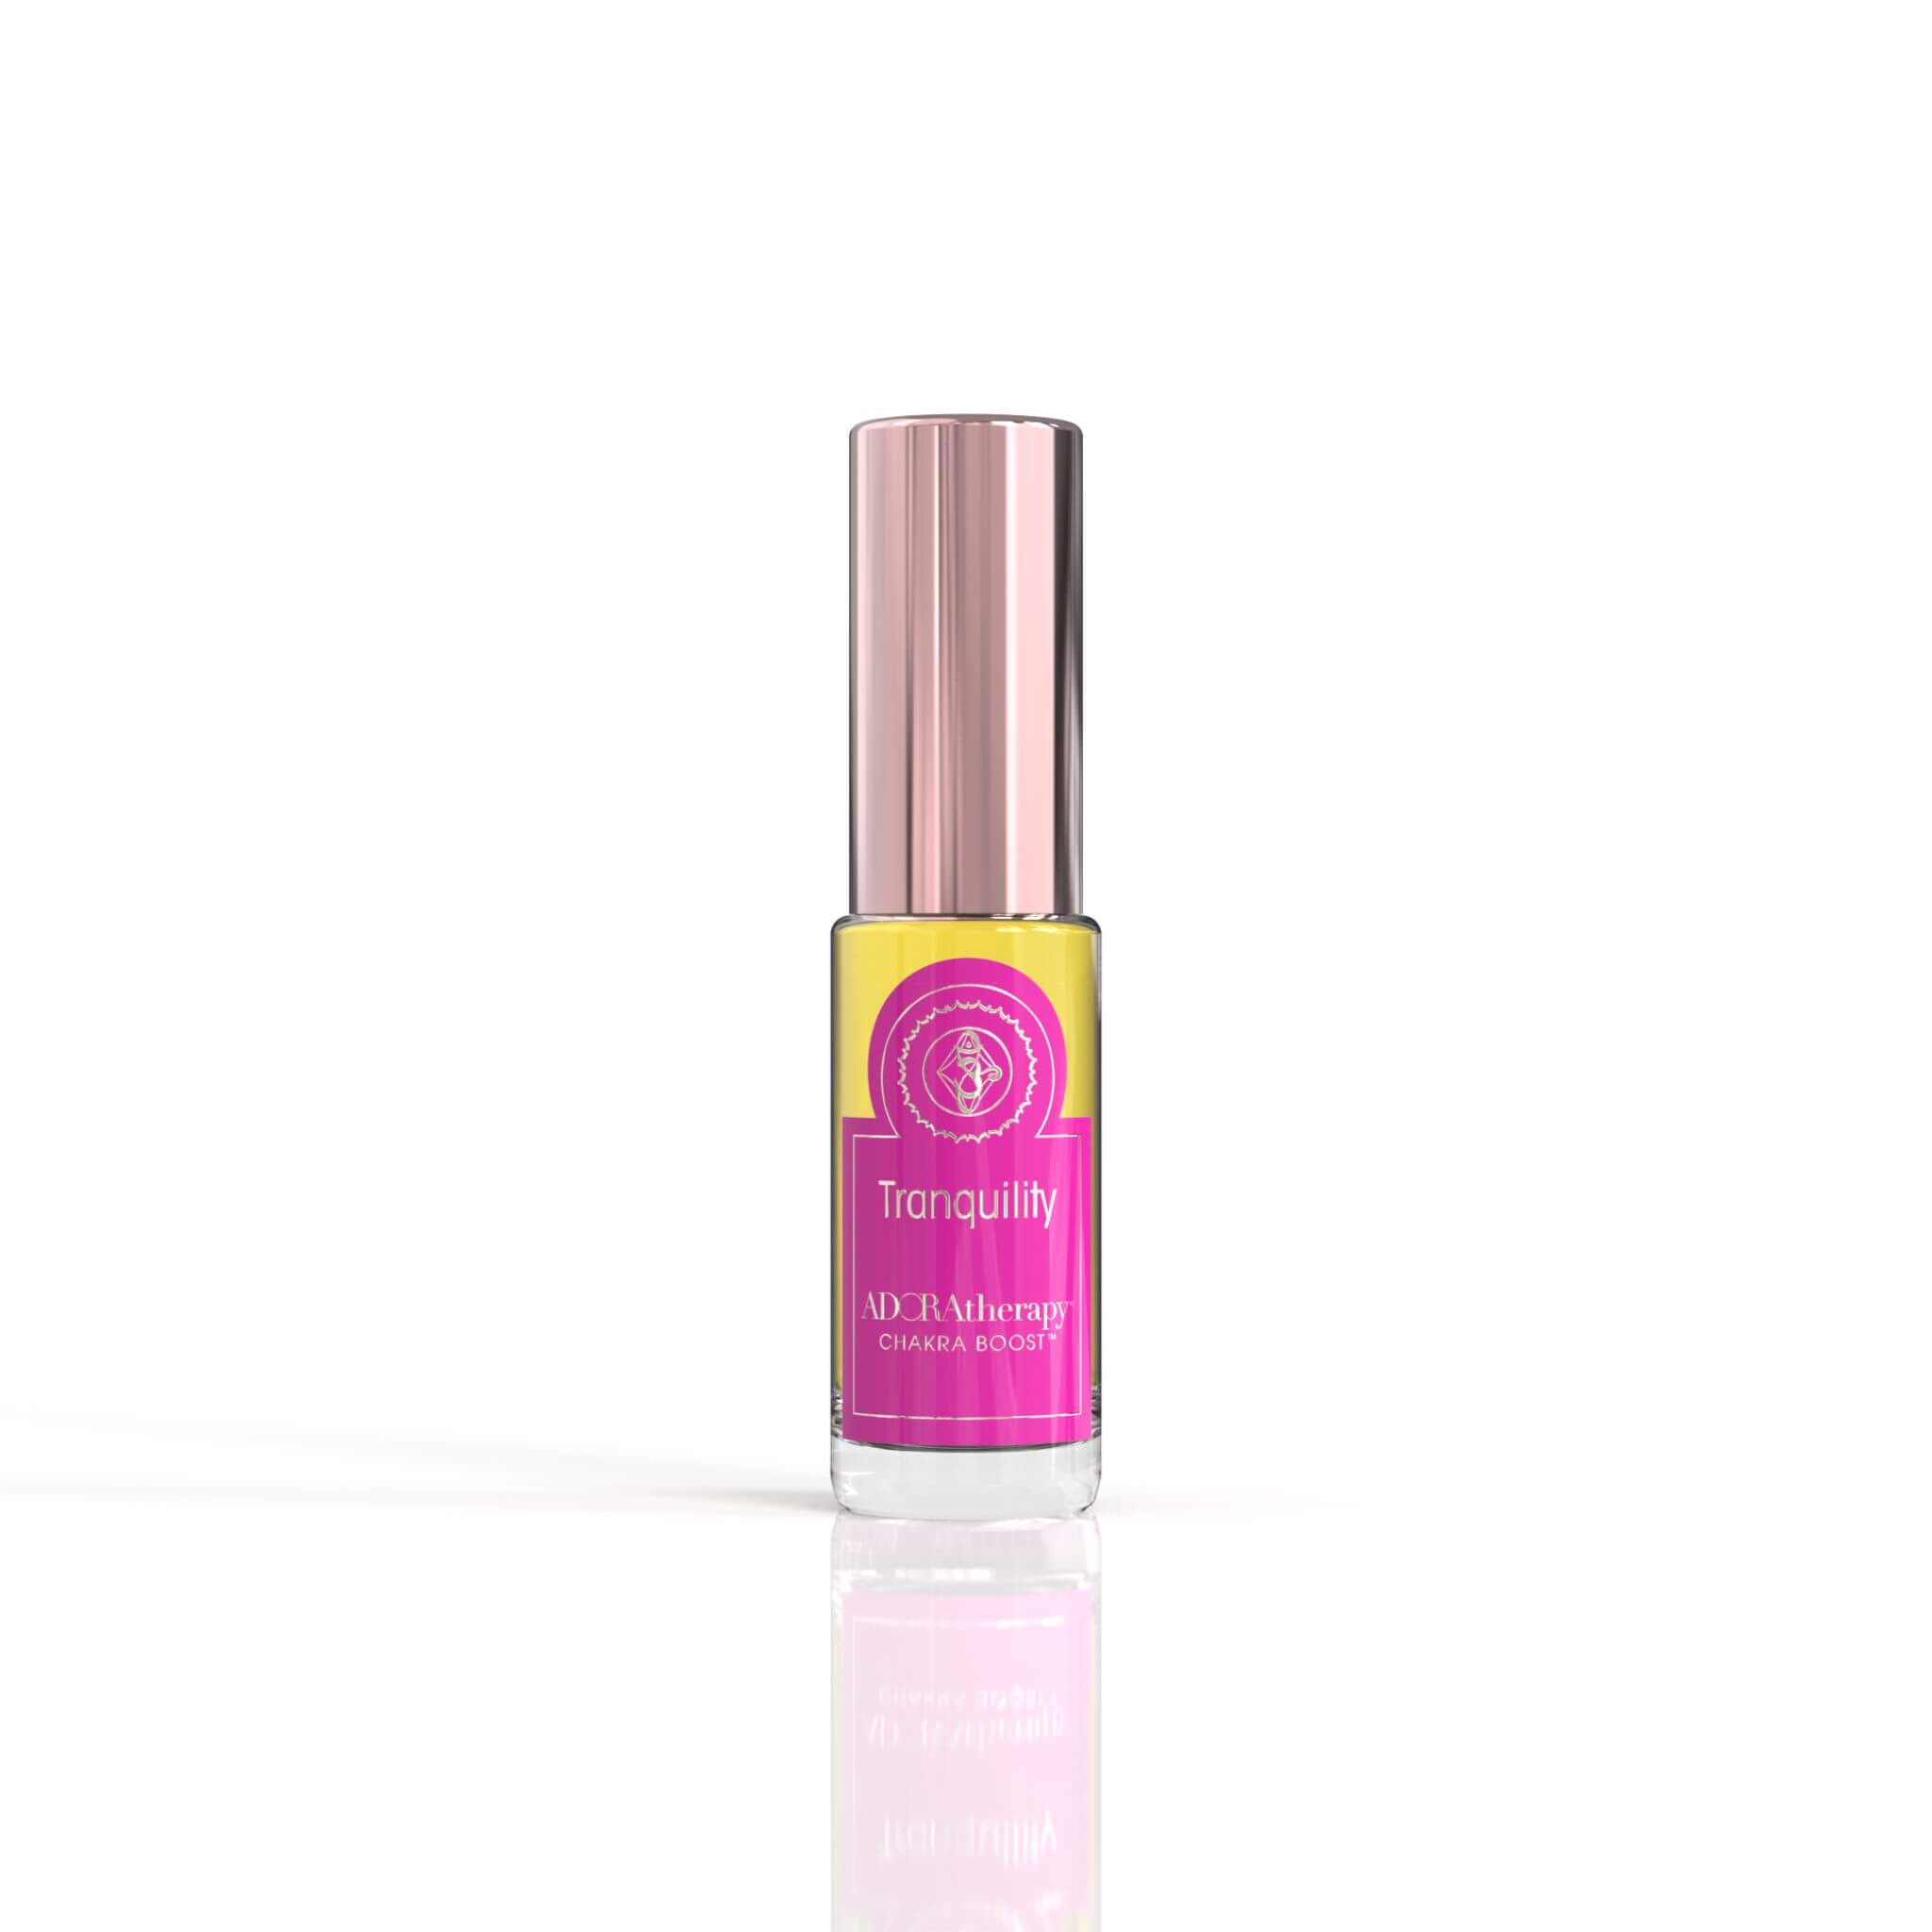 Chakra 7 Tranquility Roll On Perfume Oil by Adoratherapy.com